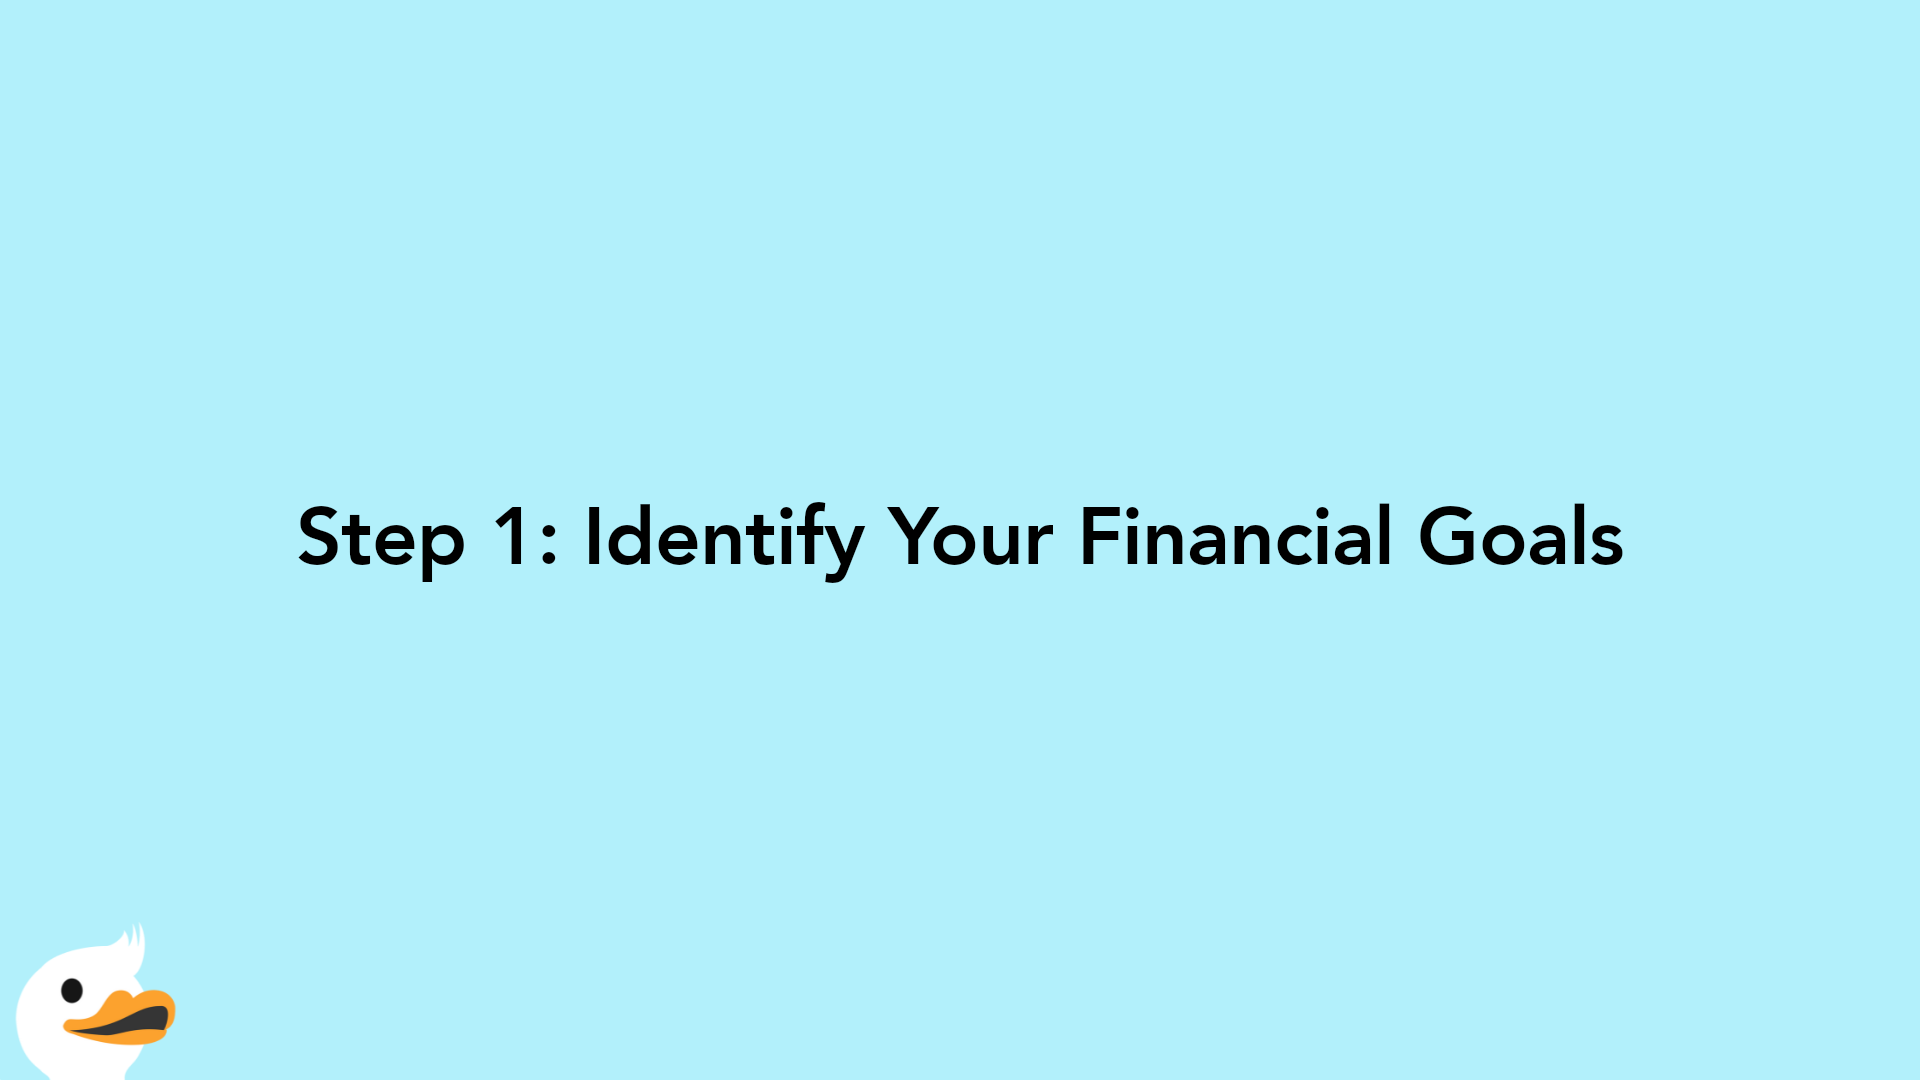 Step 1: Identify Your Financial Goals